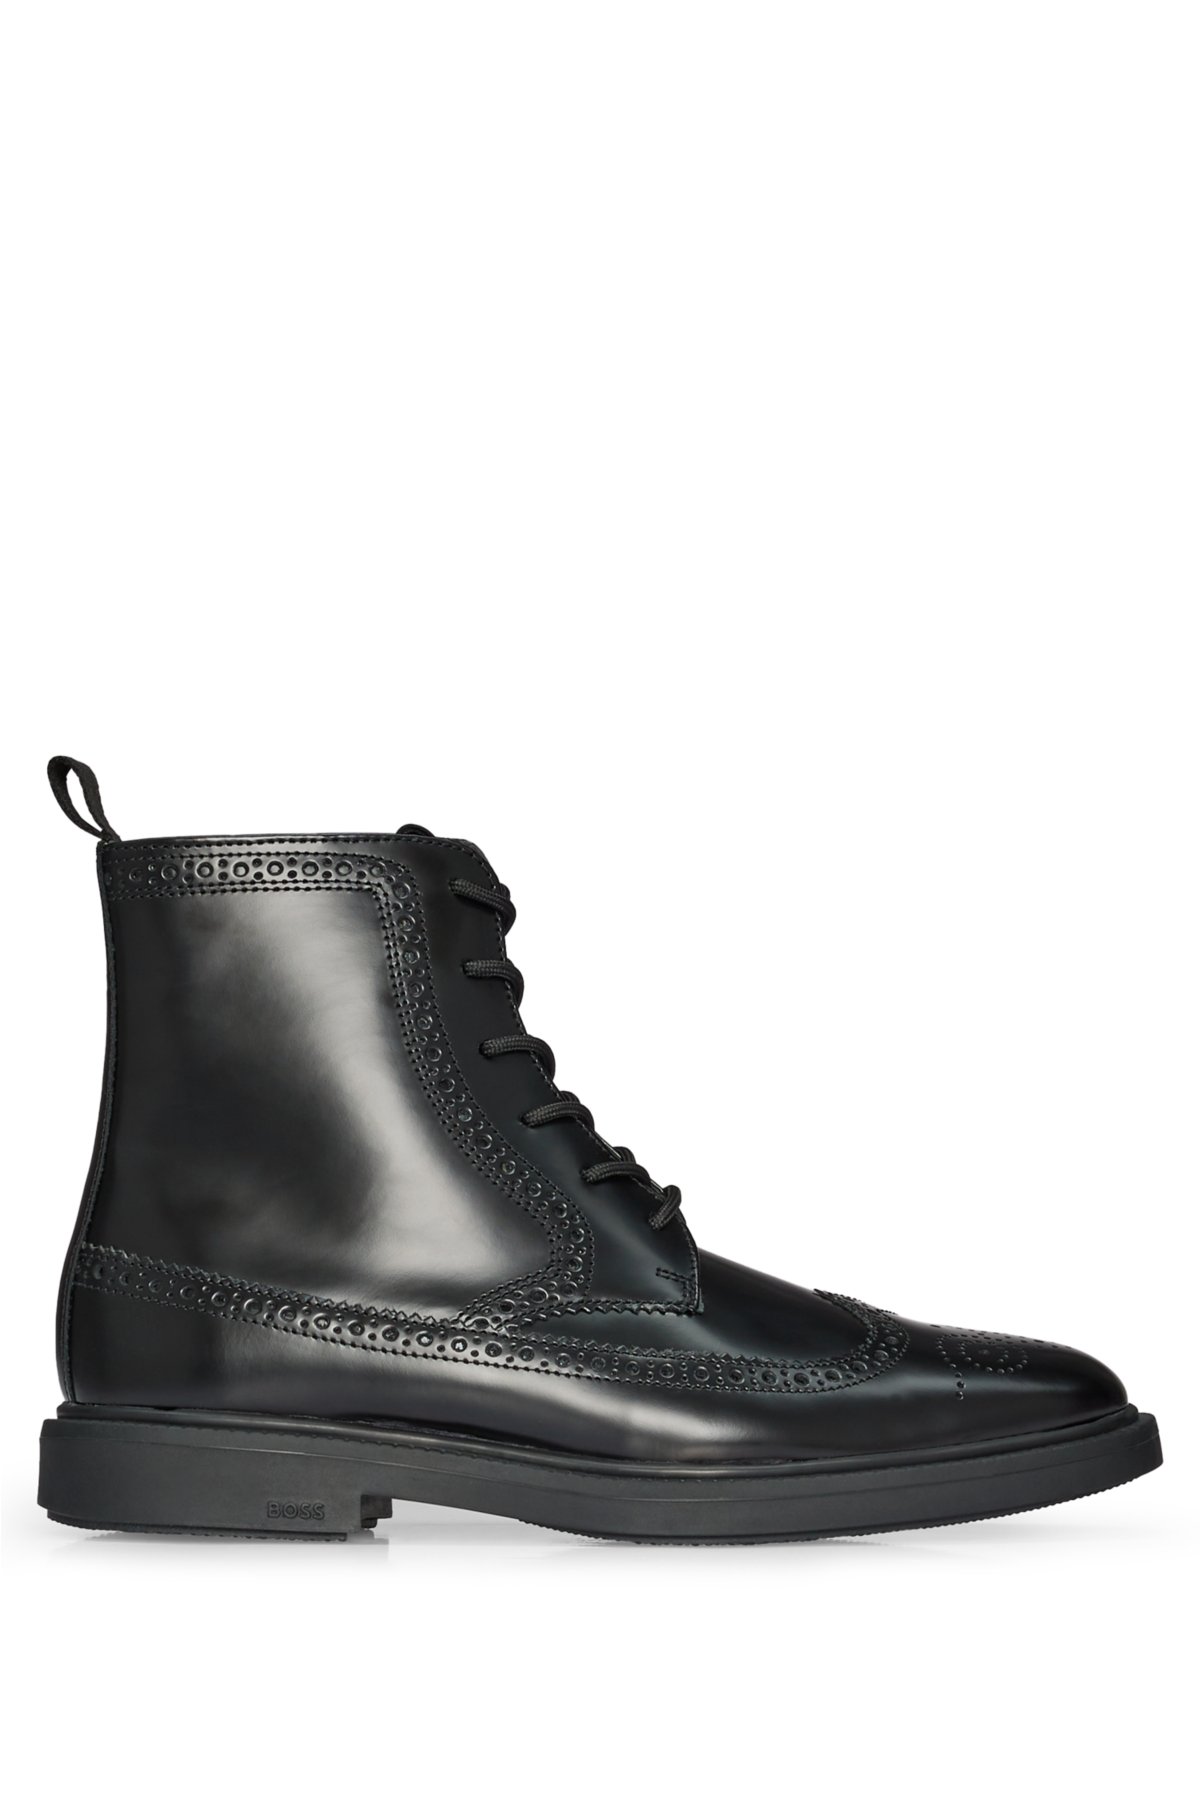 Half boots in brush-off leather with brogue detailing, Black